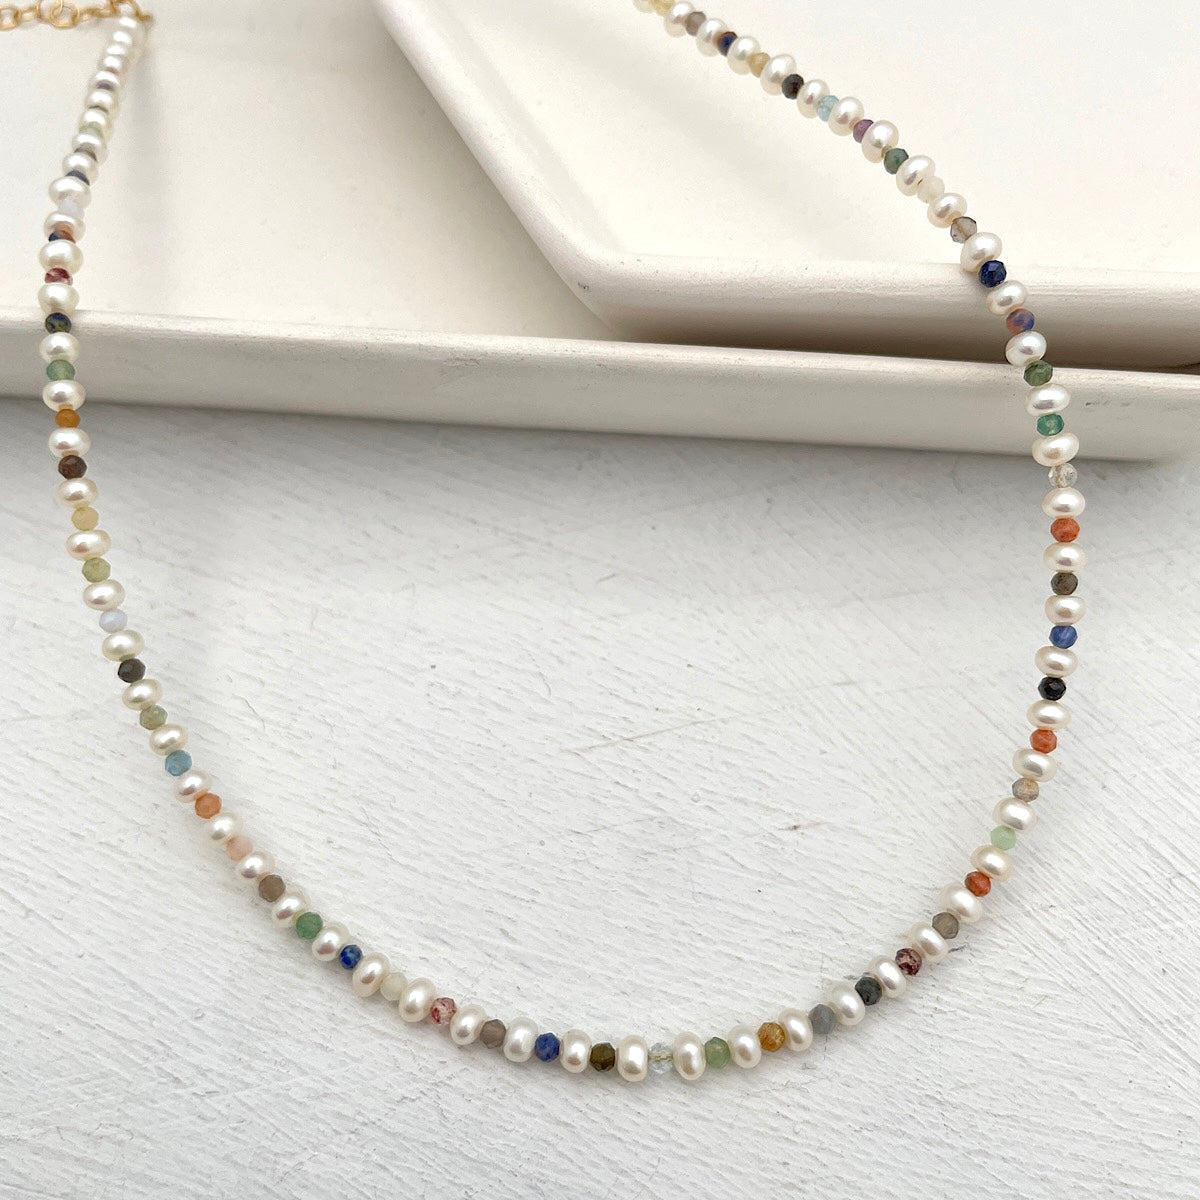 Pearl and Gemstone Choker Necklace